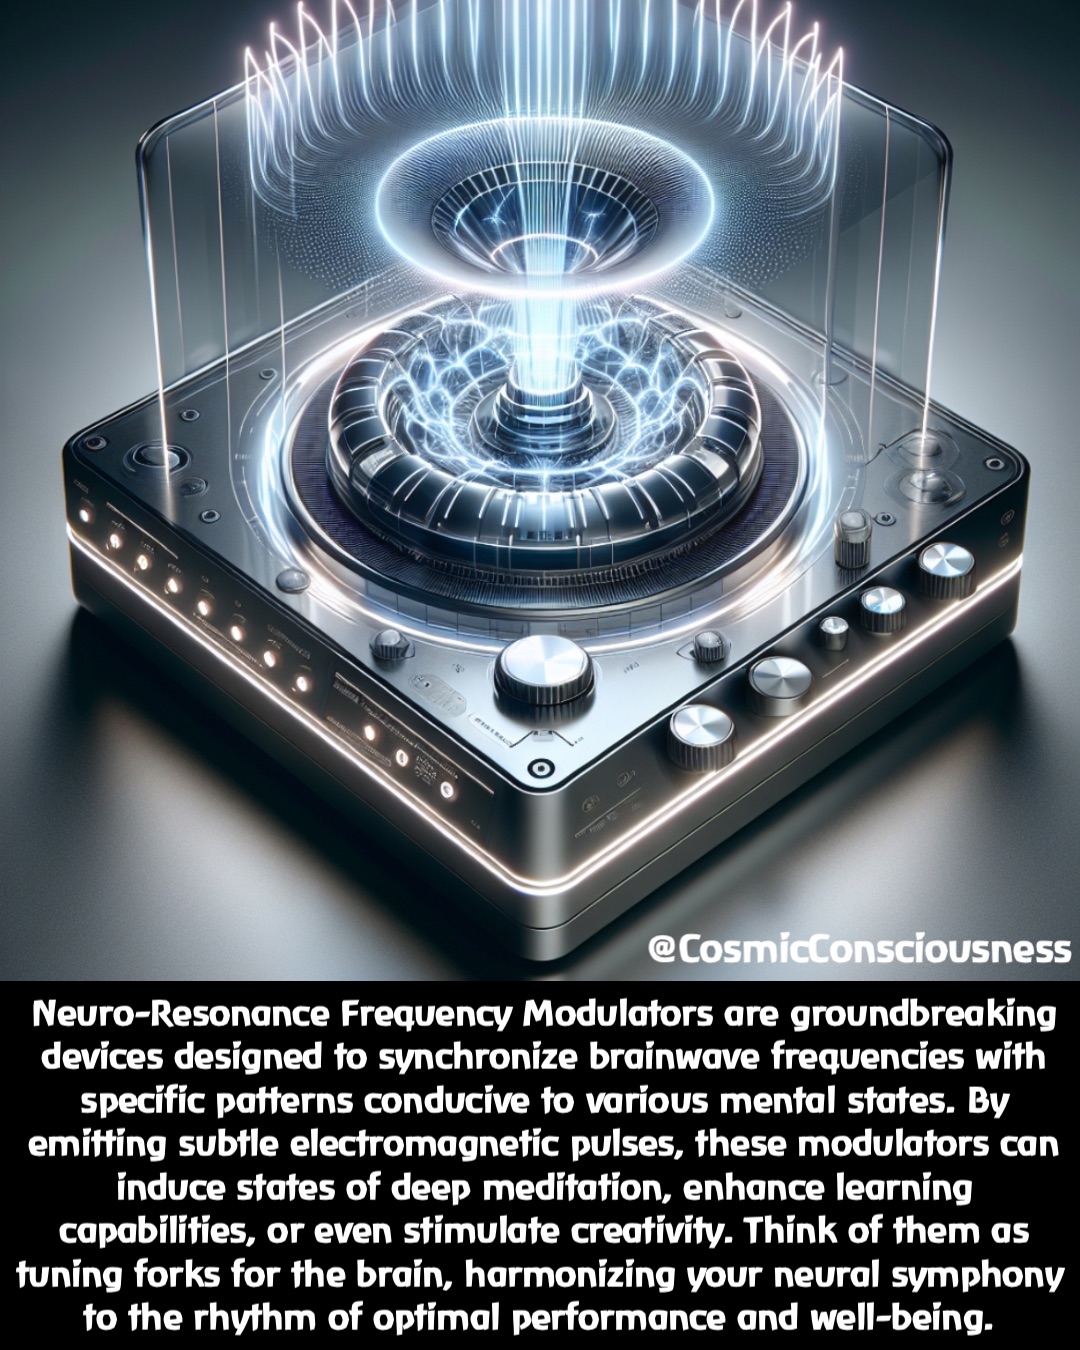 Neuro-Resonance Frequency Modulators are groundbreaking devices designed to synchronize brainwave frequencies with specific patterns conducive to various mental states. By emitting subtle electromagnetic pulses, these modulators can induce states of deep meditation, enhance learning capabilities, or even stimulate creativity. Think of them as tuning forks for the brain, harmonizing your neural symphony to the rhythm of optimal performance and well-being. @CosmicConsciousness